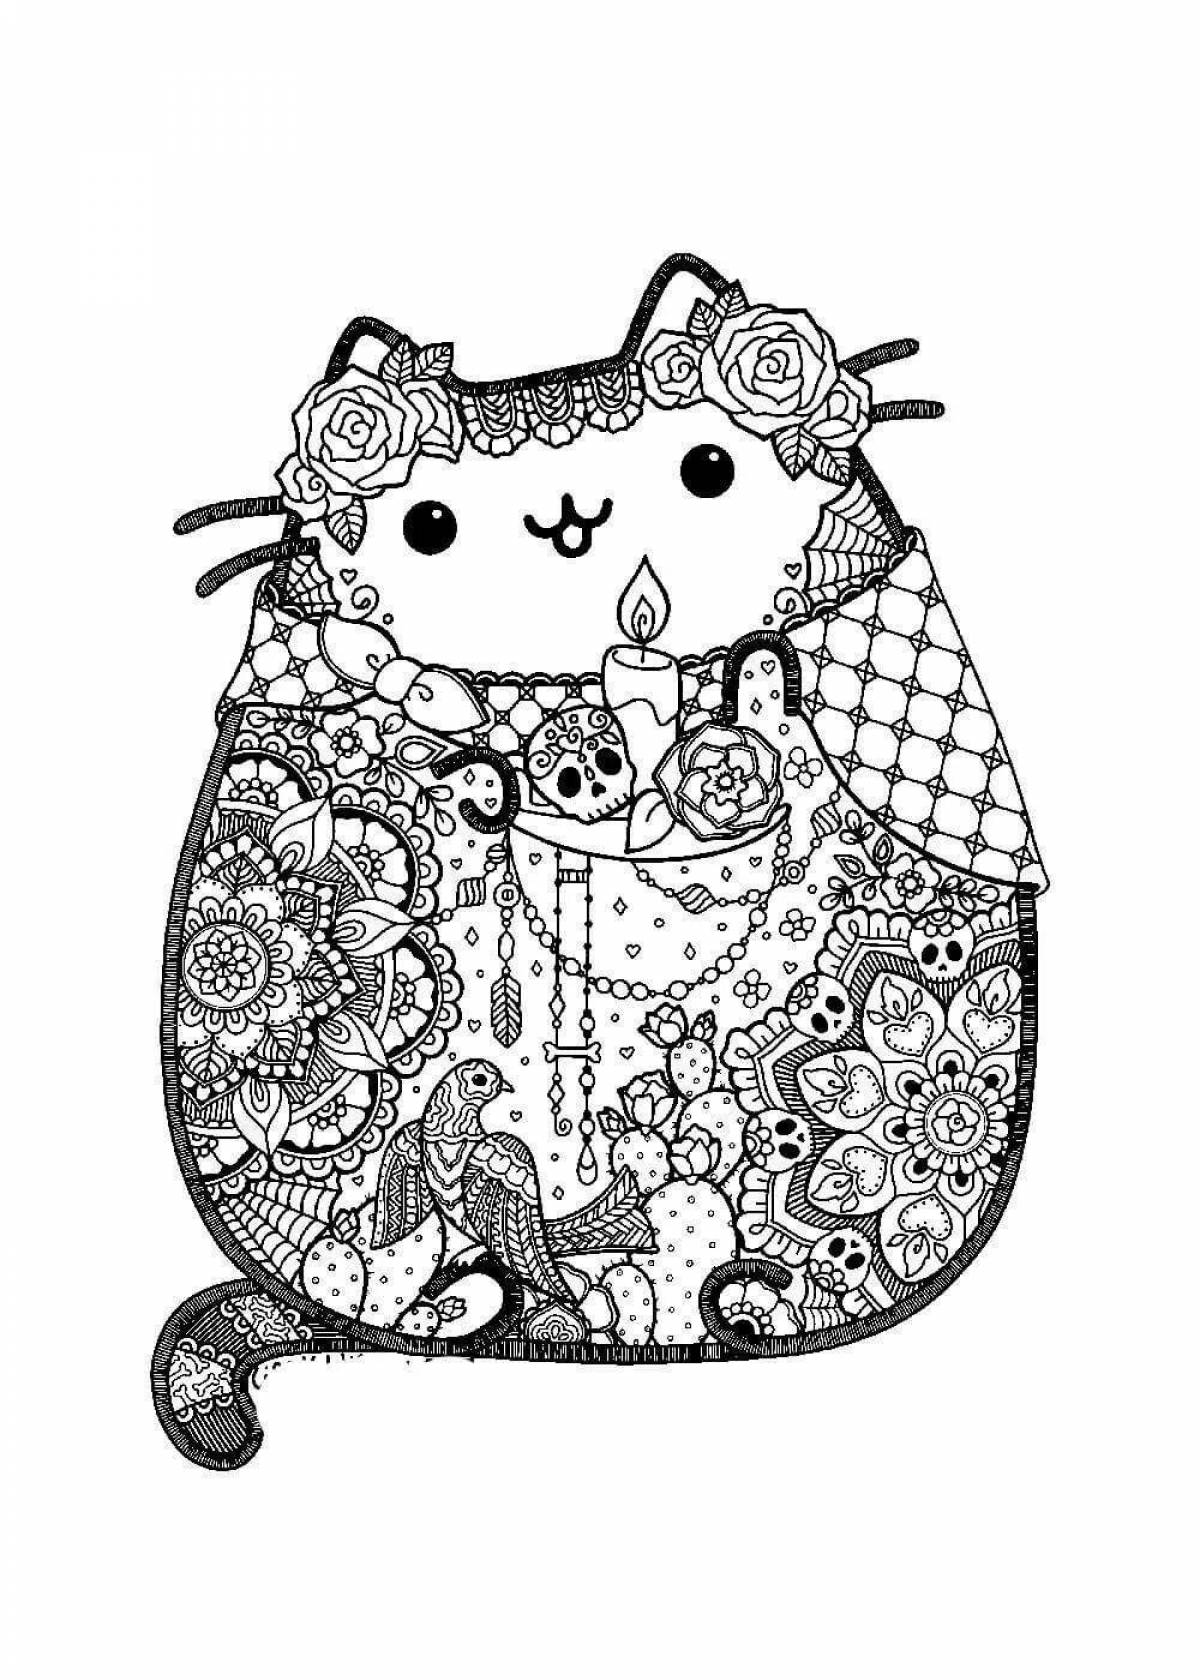 Radiant pusheen cat coloring page